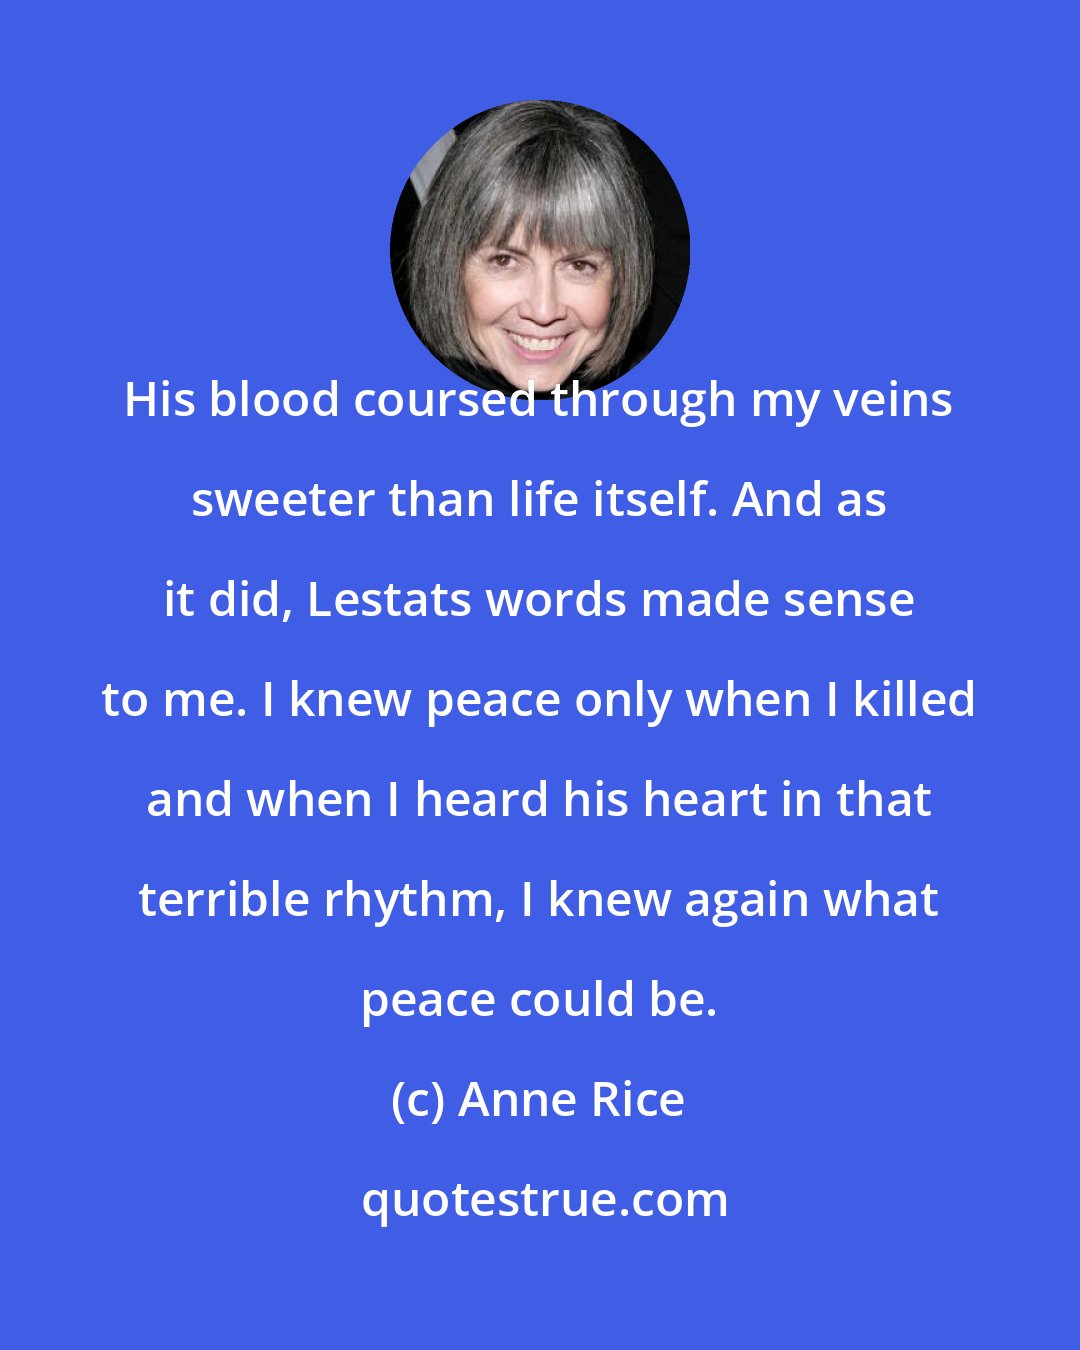 Anne Rice: His blood coursed through my veins sweeter than life itself. And as it did, Lestats words made sense to me. I knew peace only when I killed and when I heard his heart in that terrible rhythm, I knew again what peace could be.